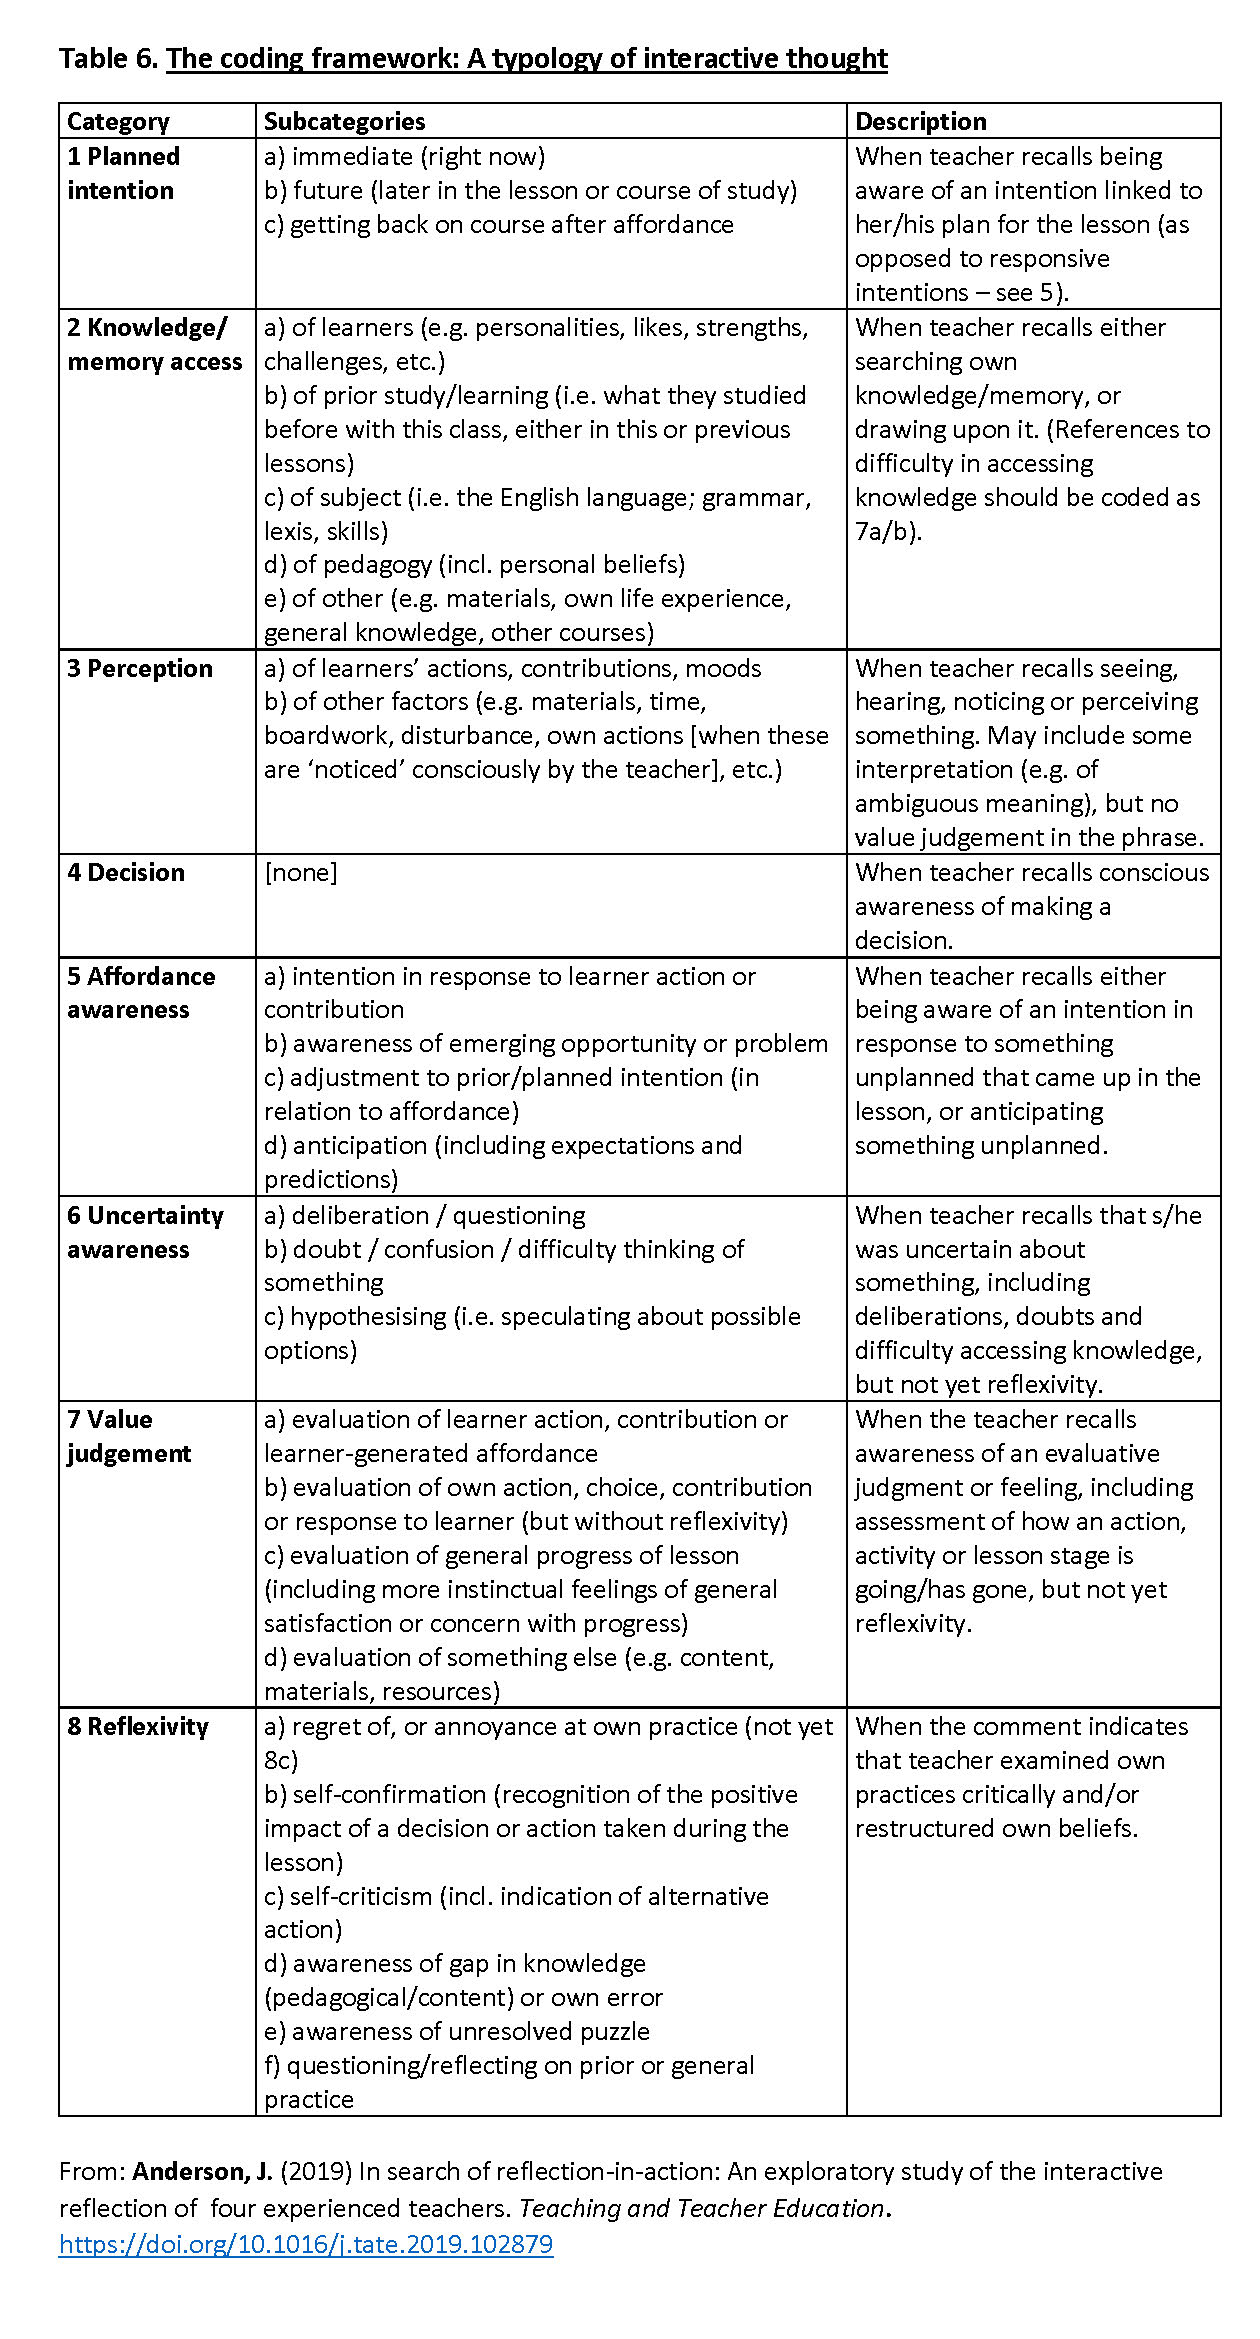 Table_6._The_coding_framework-A_typology_of_teacher_interactive_thought